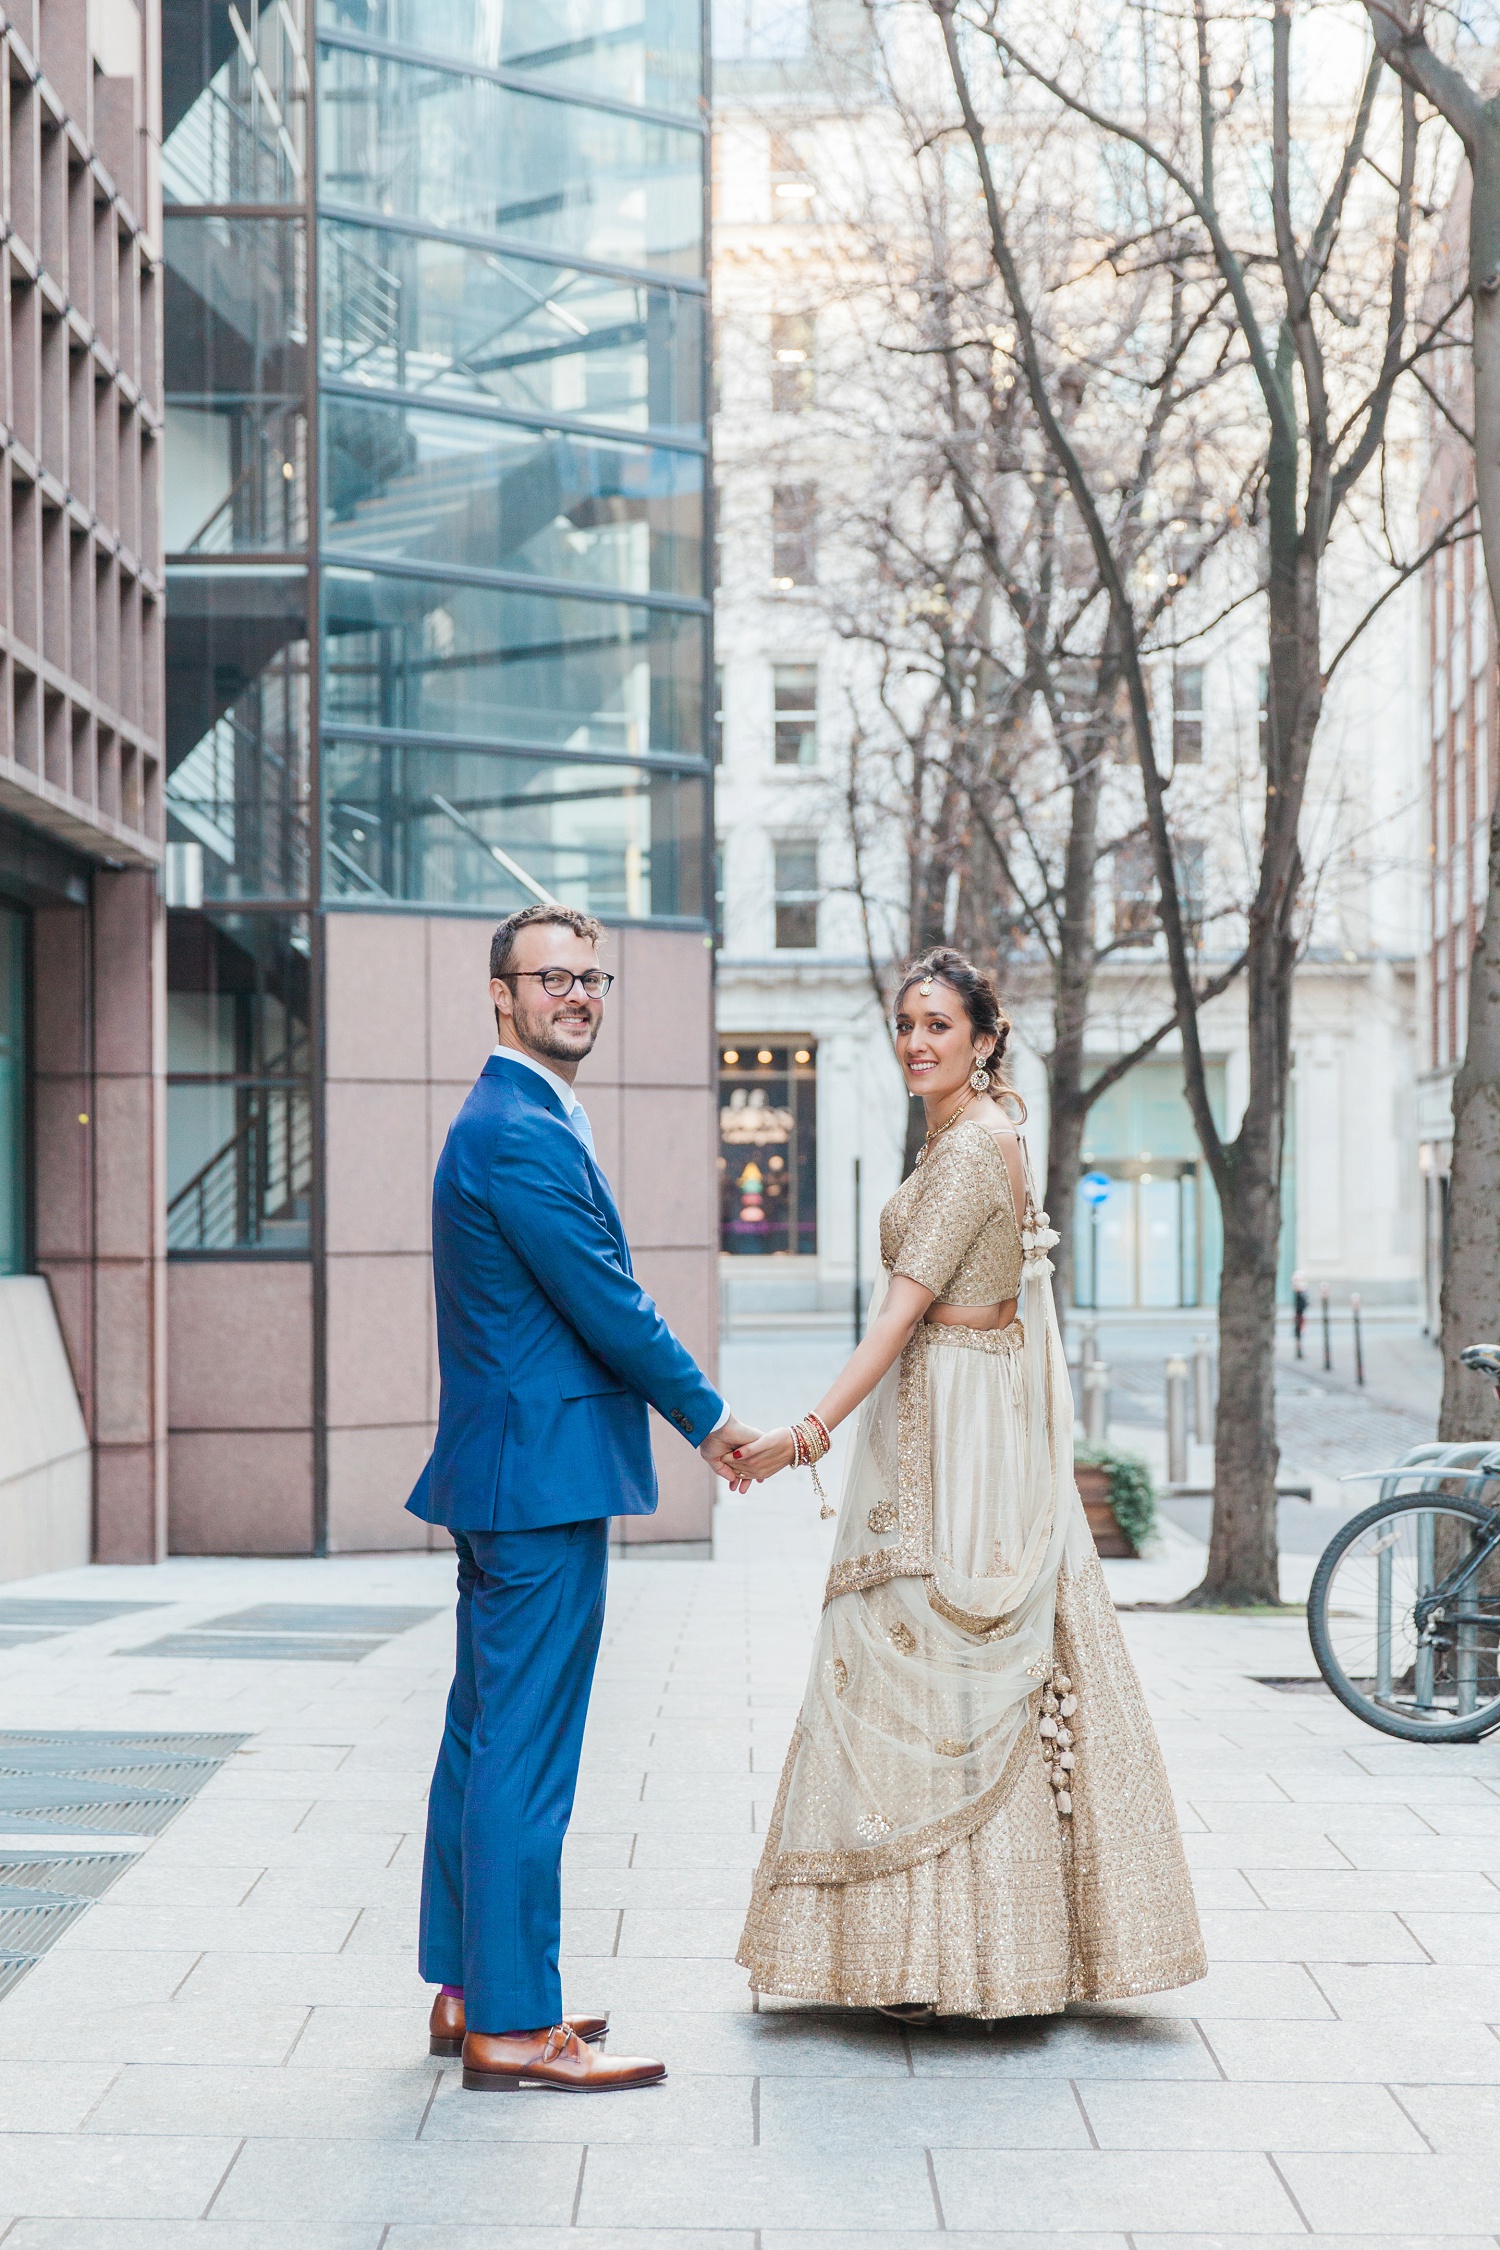 Jewish groom and Indian bride during their South Place Hotel wedding in London